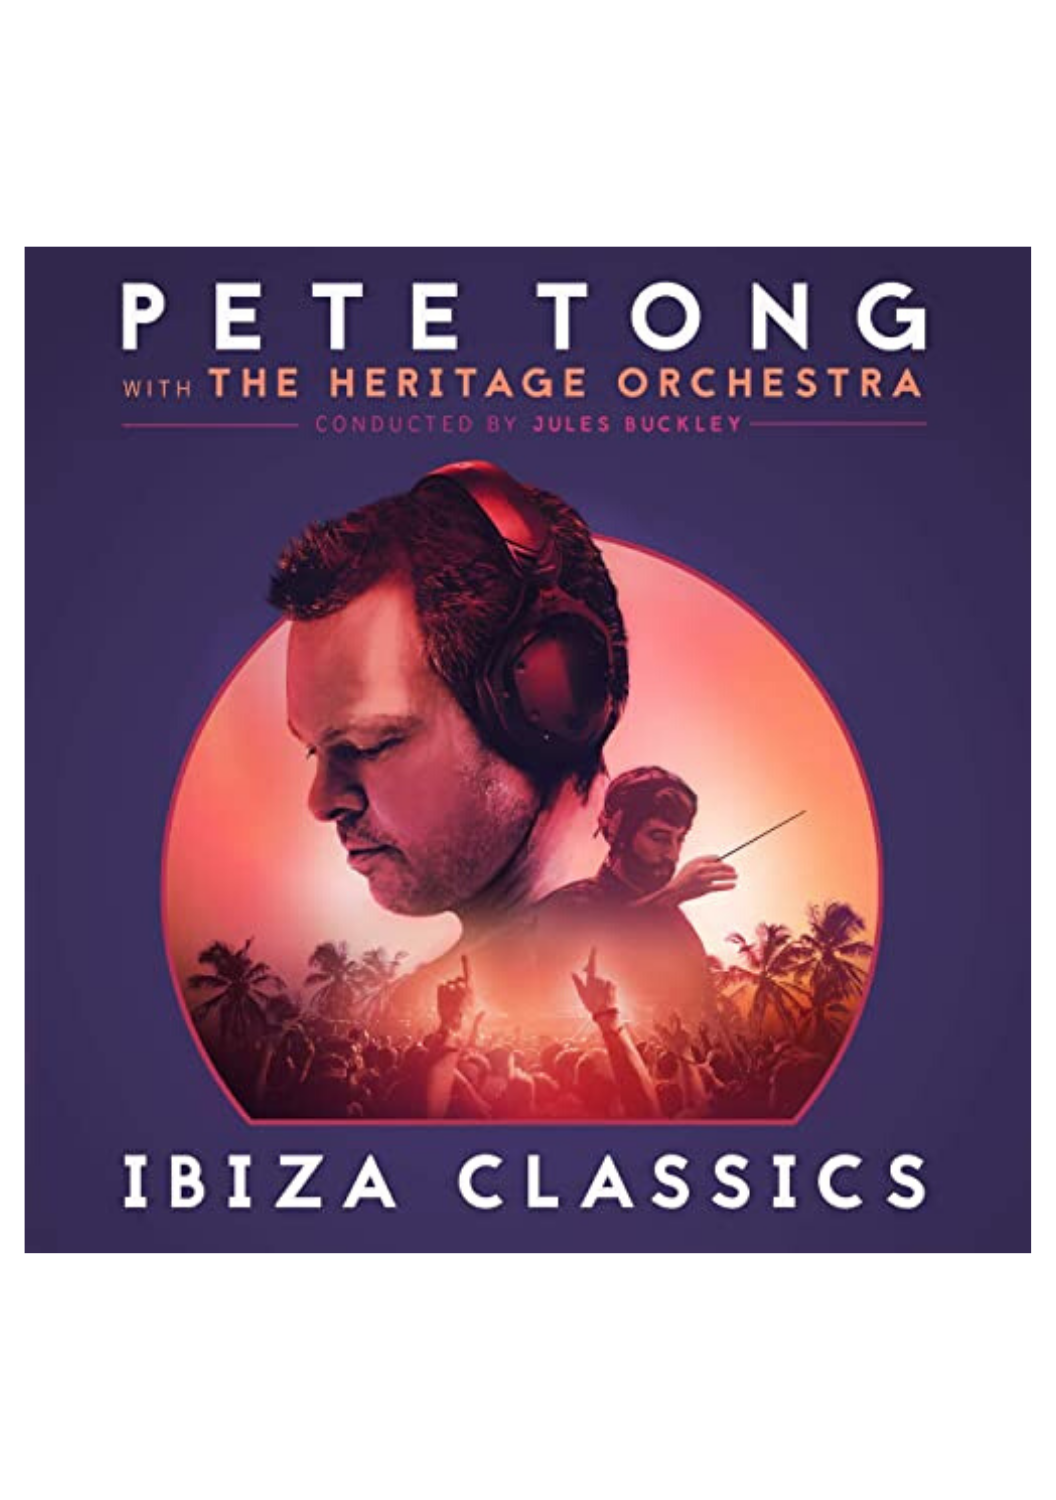 07) PETE TONG AND HERITAGE ORCH.png